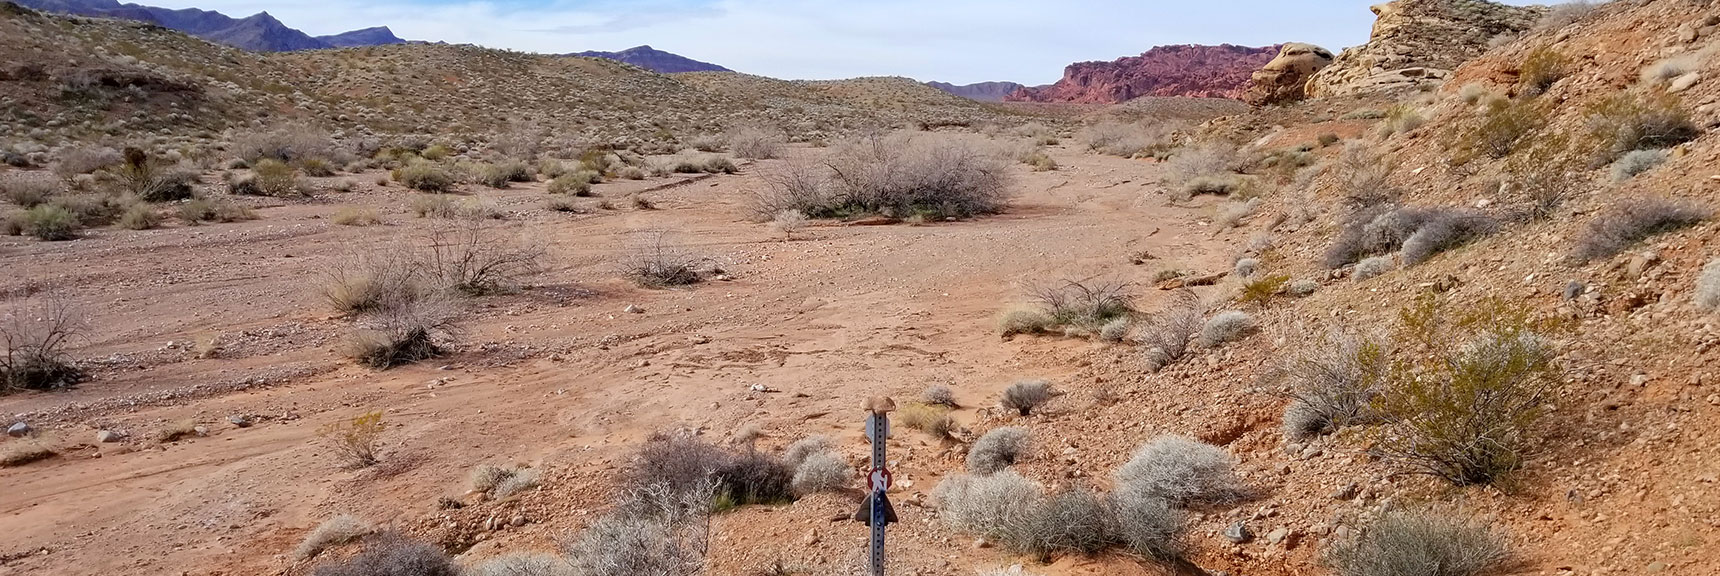 Location Where I Lost the Trail Earlier on the Old Arrowhead Trail in Valley of Fire State Park, Nevada